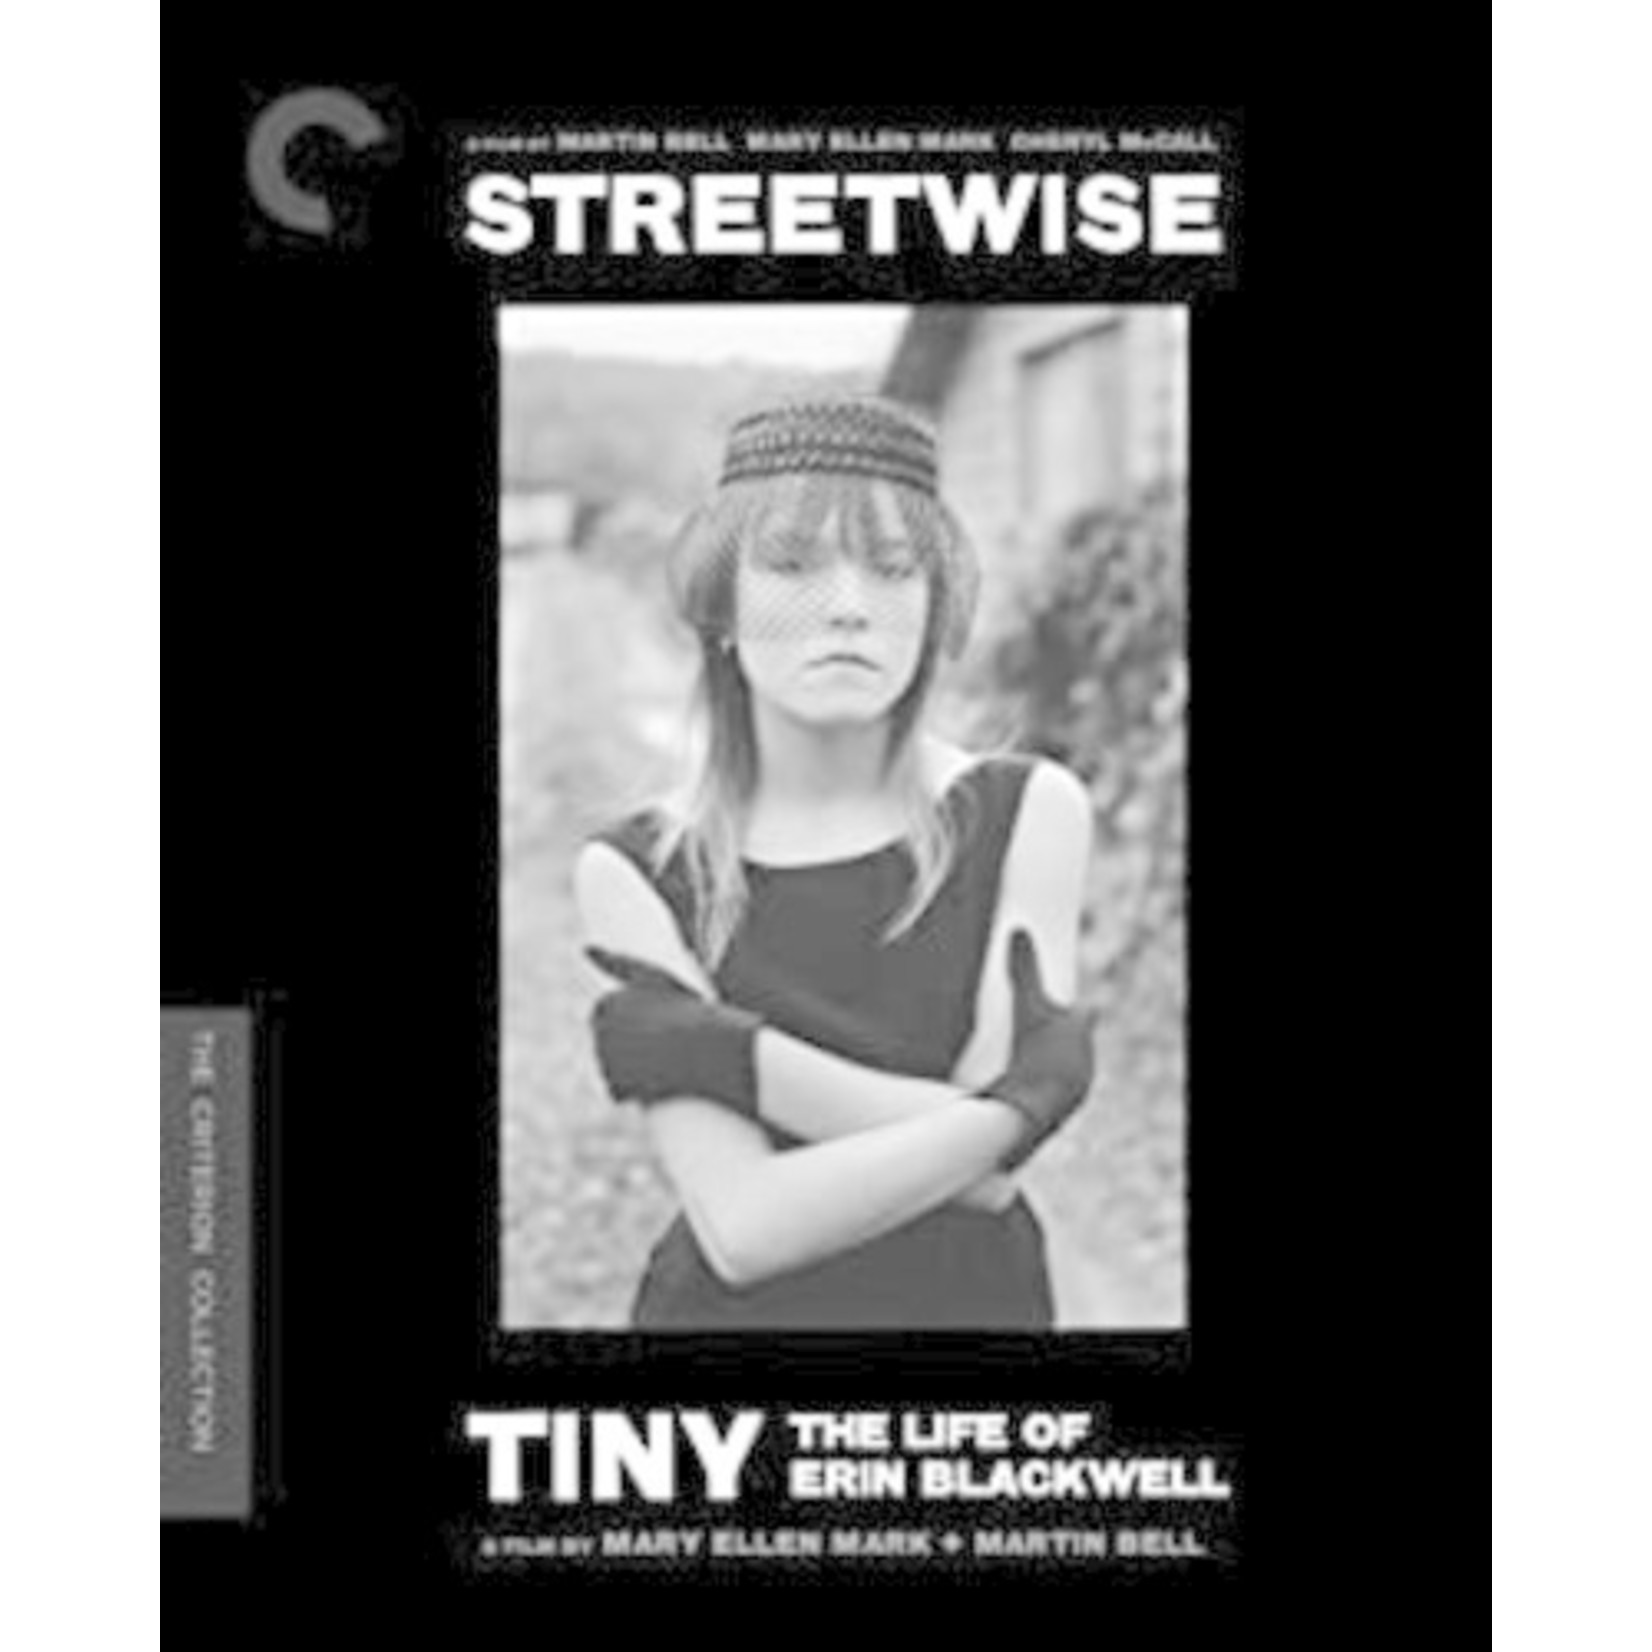 Criterion Collection Streetwise / Tiny: The Life of Erin Blackwell (BD)